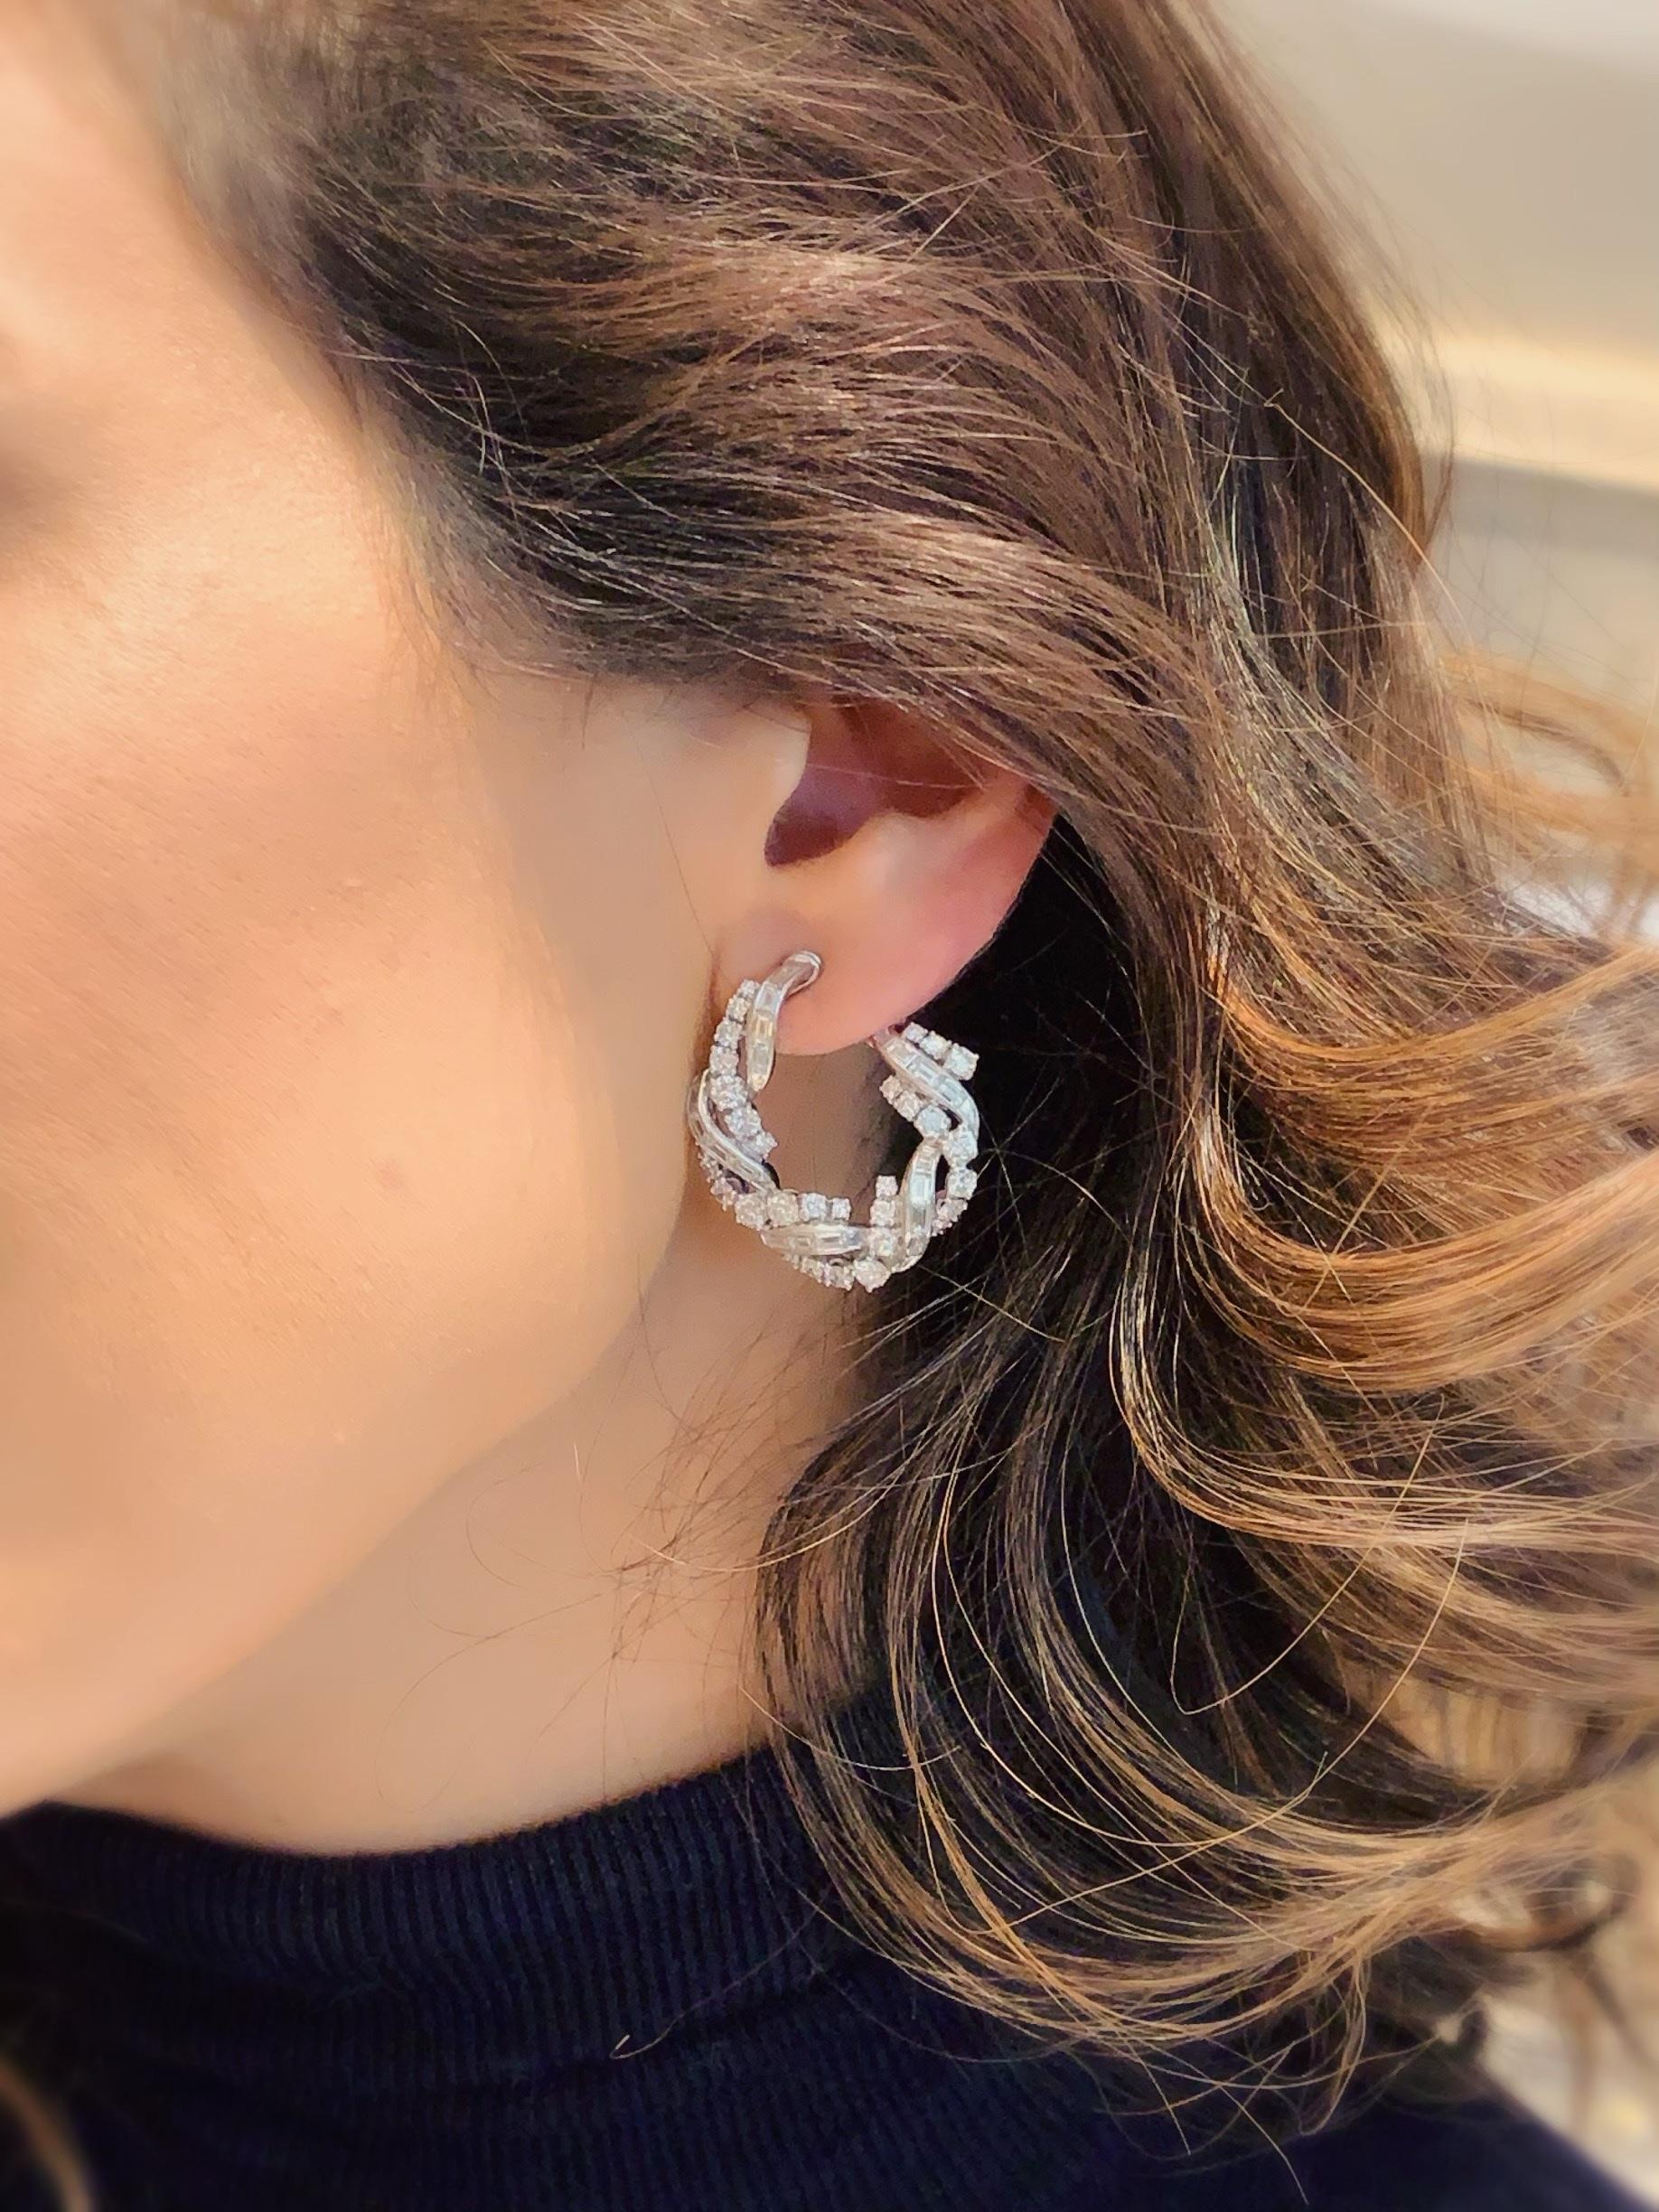 The ever-stylish hoop earring is made magical in these front-facing, mid-20th century sparkling diamond earrings that look like braided strands of light. The interplay of the brilliant round-cut stones with the mirrored baguette-cuts, set in